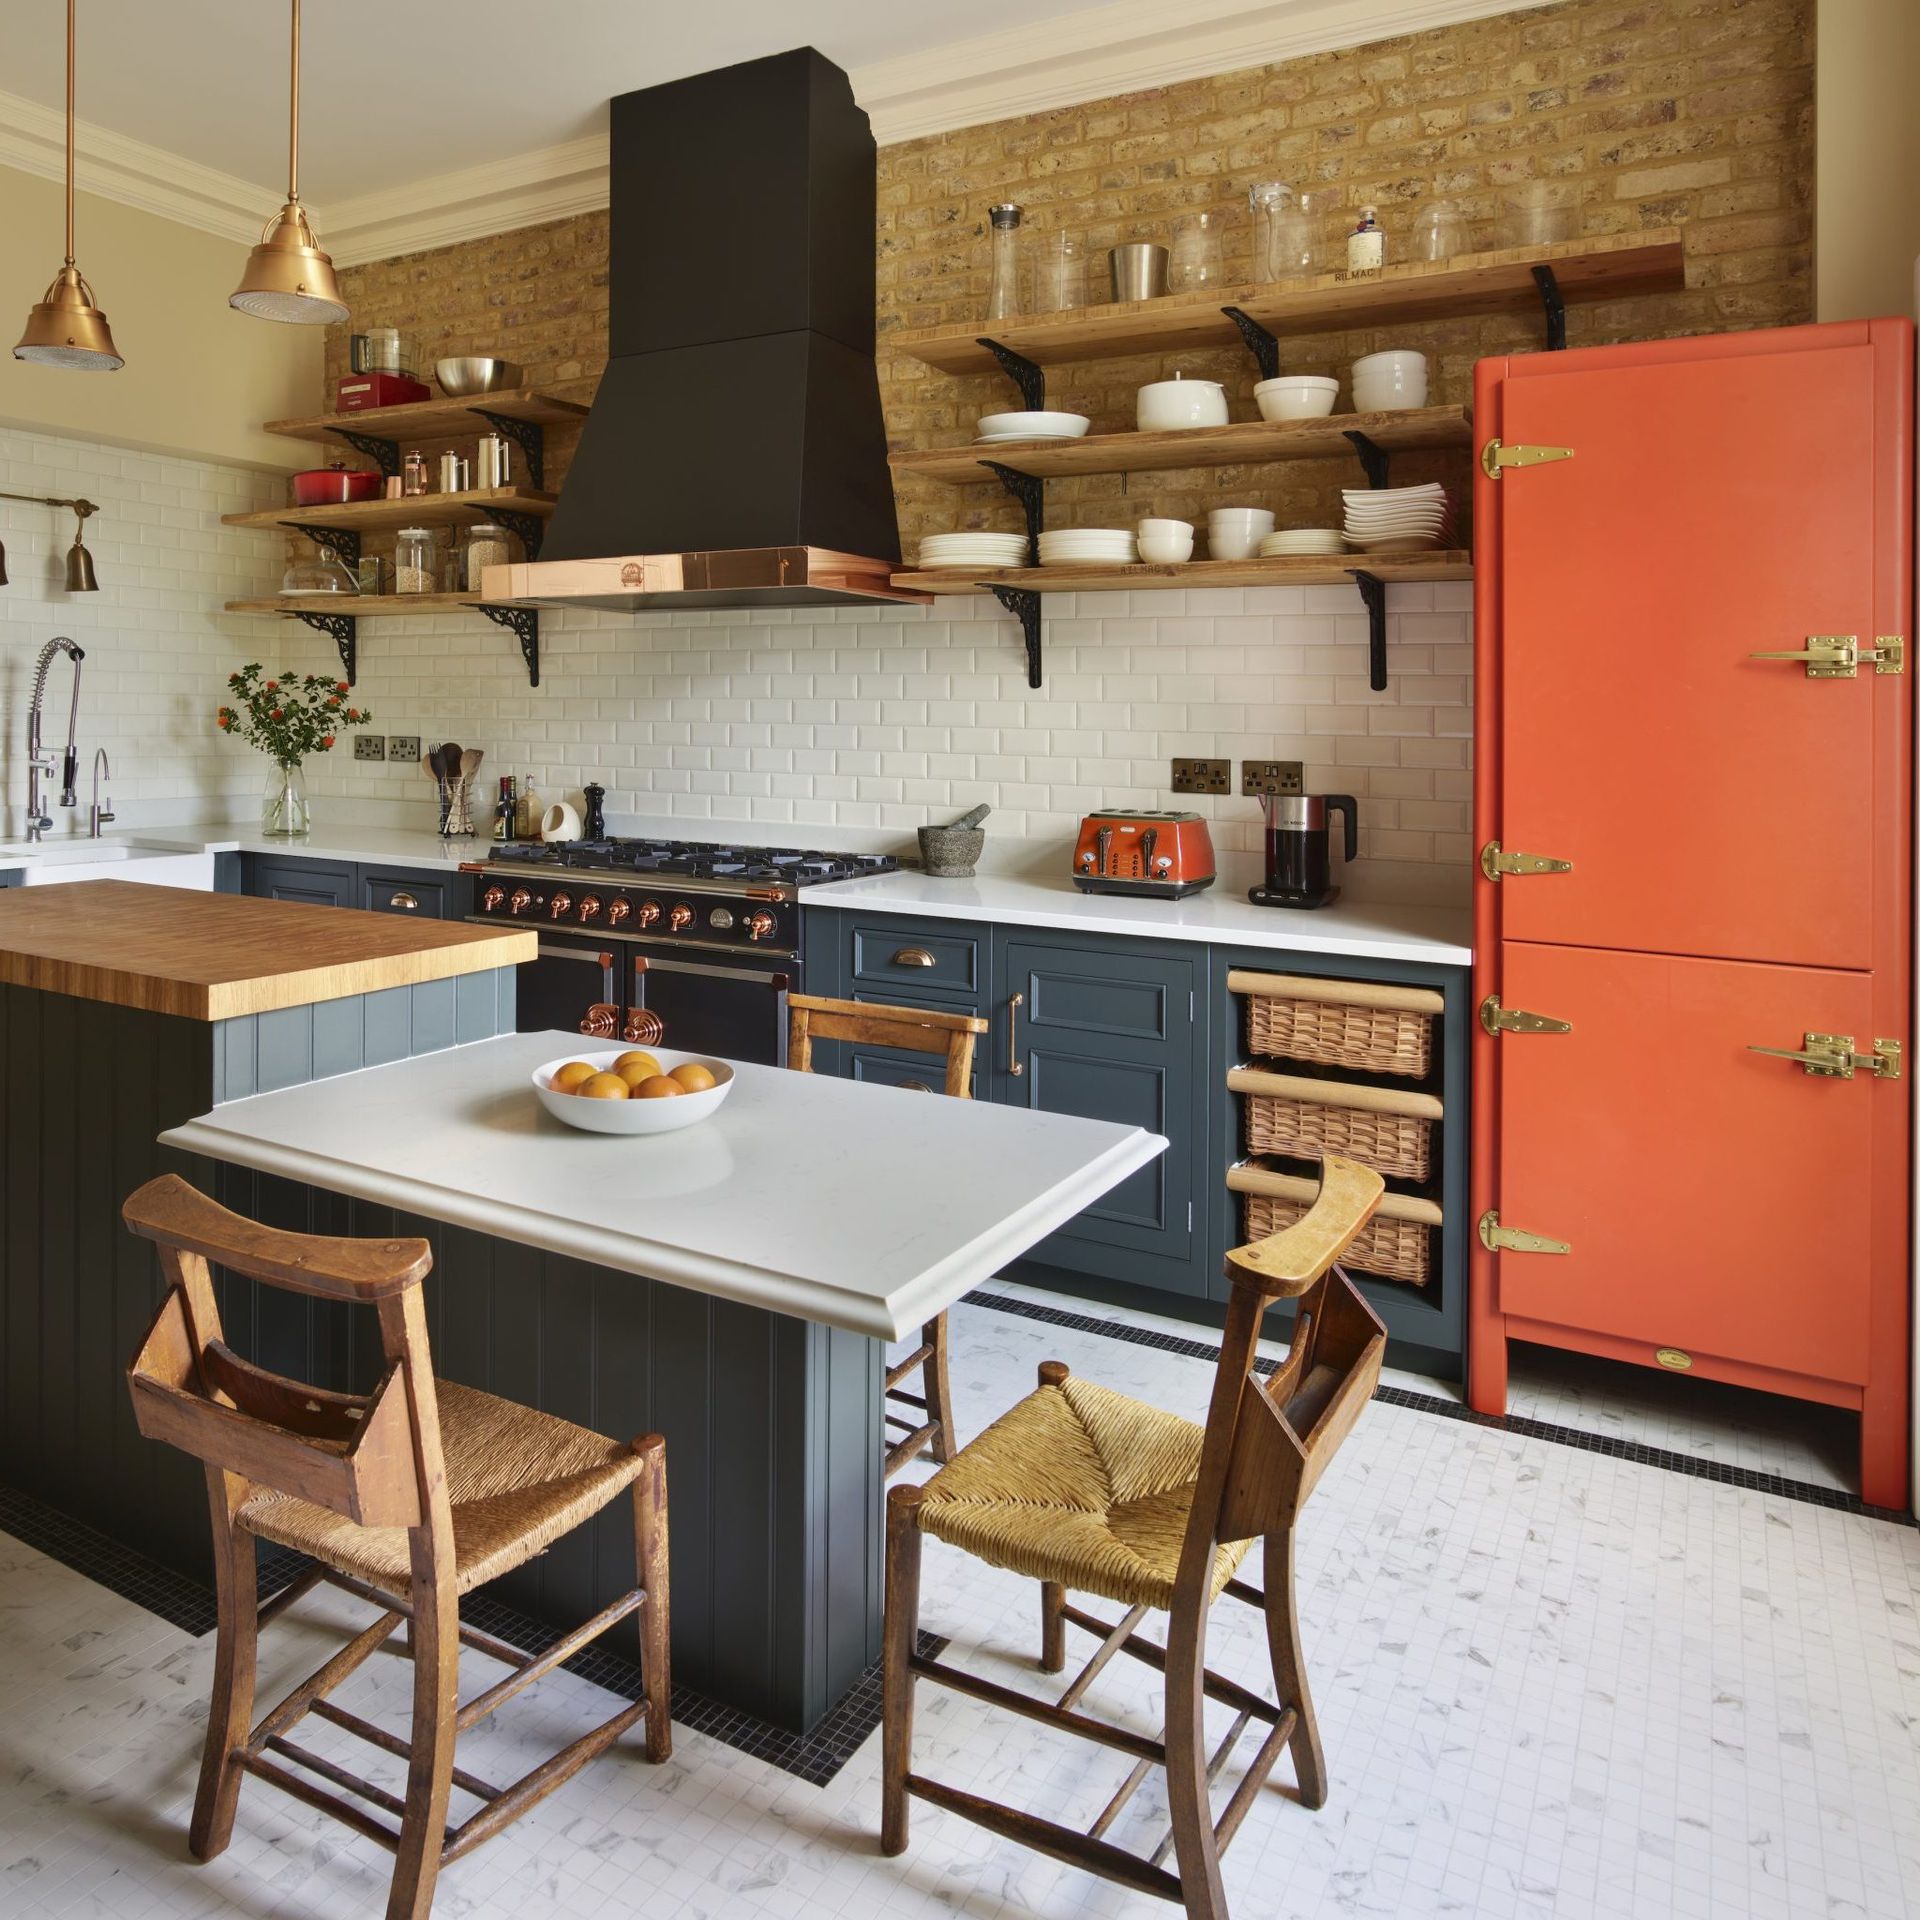 <p>                     ‘We’re anticipating braver colours in the kitchen this year, particularly ocean blues, botanical greens and zesty oranges,’ says Melissa from Harvey Jones.                   </p>                                      <p>                     You may be cautious about experimenting with bright kitchen paint, however. If that's the case for you then try incorporating pops of colour into otherwise neutral schemes.                   </p>                                      <p>                     ‘In a country kitchen, use a neutral base of charcoal, white or natural wood to stop bold shades overpowering,' advises Melissa. 'Balancing strong colour with more restful materials is the secret to a liveable kitchen that will last beyond trends.’                   </p>